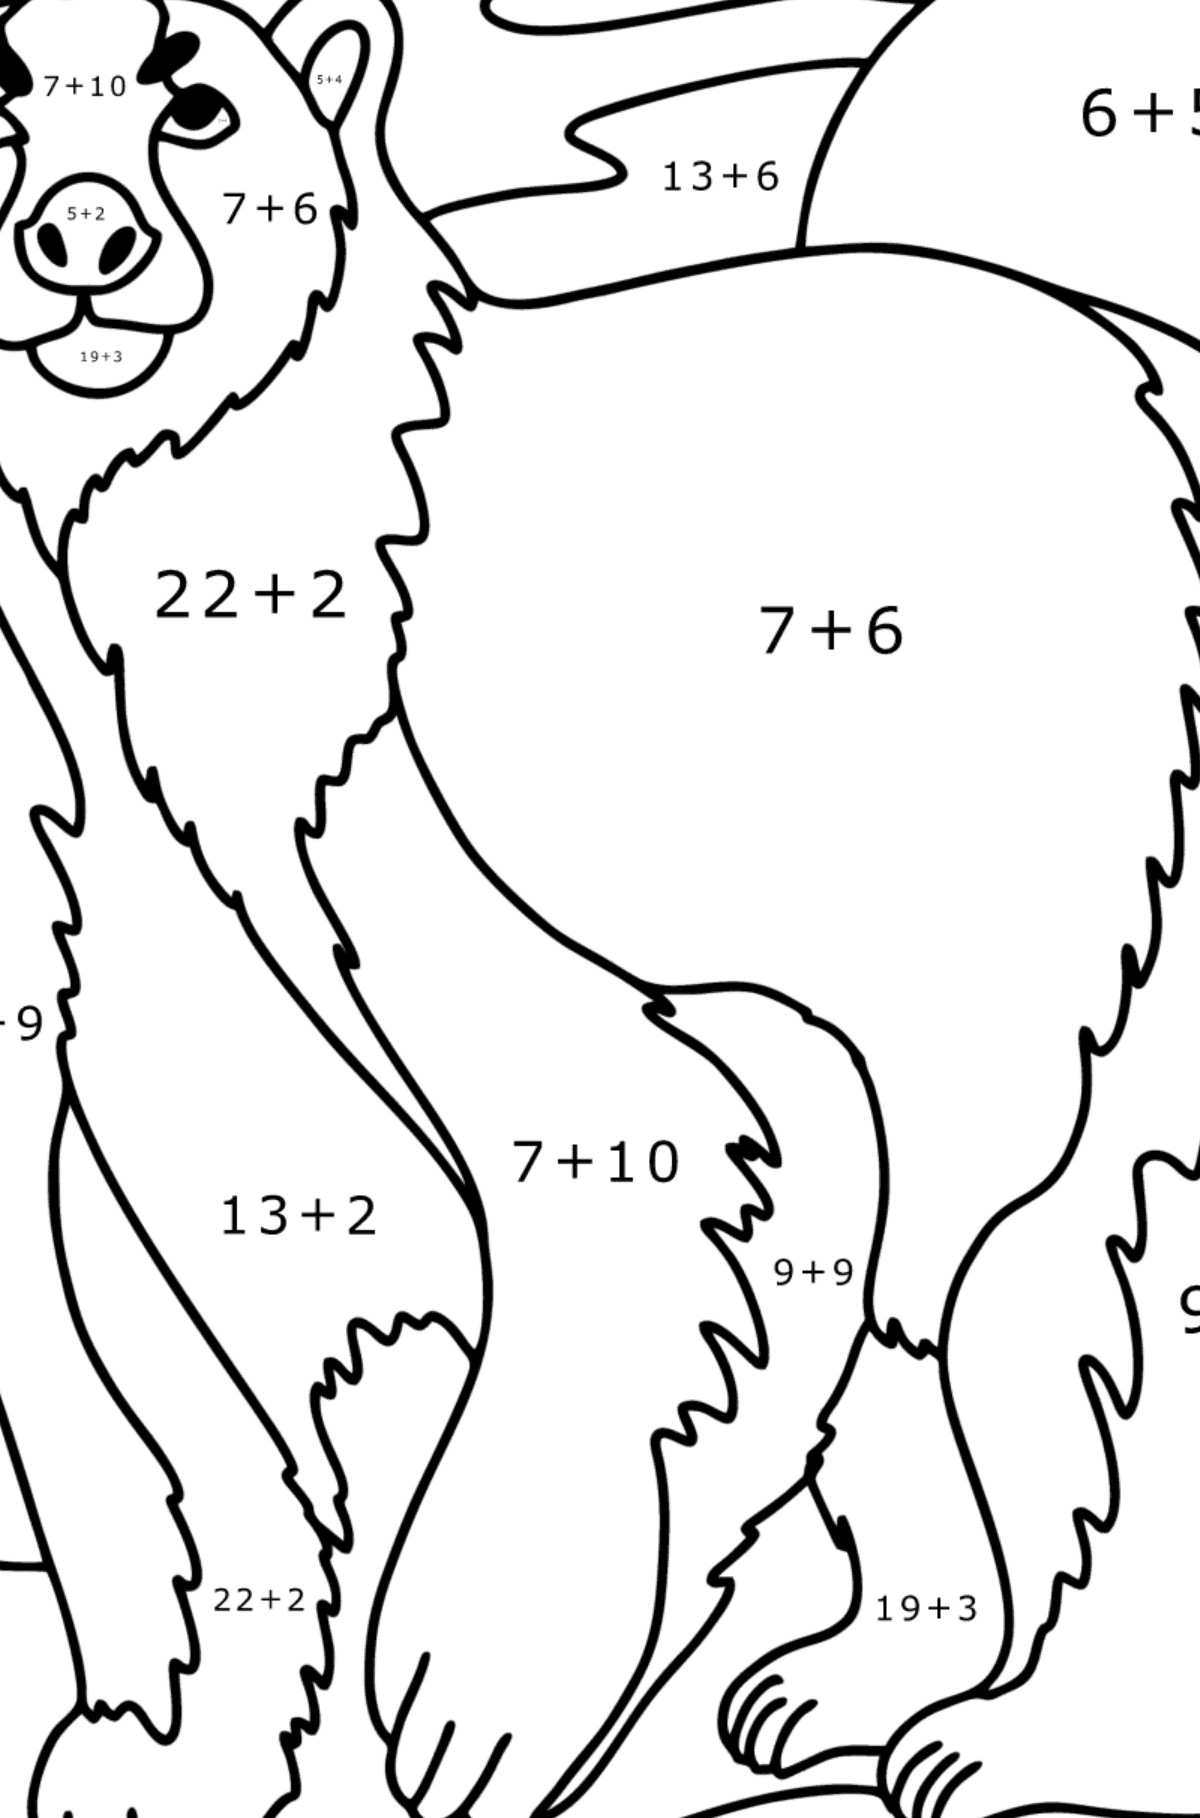 Polar bear coloring page - Math Coloring - Addition for Kids